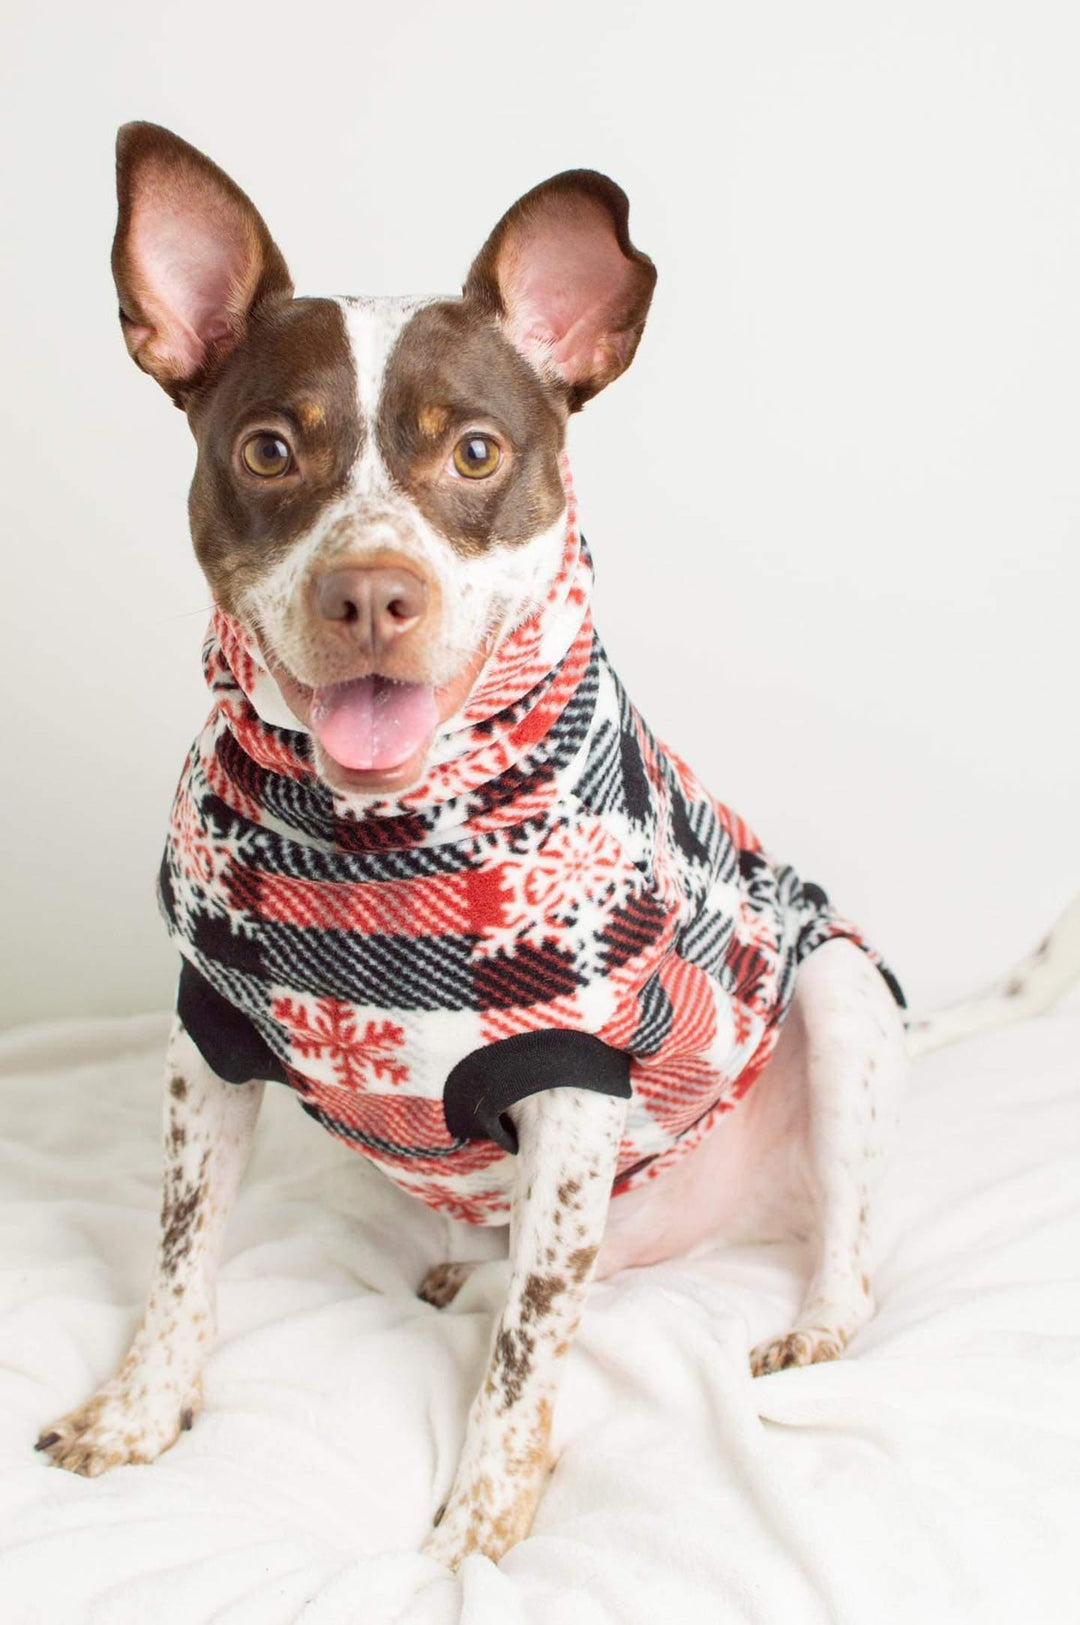 Dog wearing a Jax & Molly's fleece pullover dog sweater in red, white, and black plaid with snowflakes